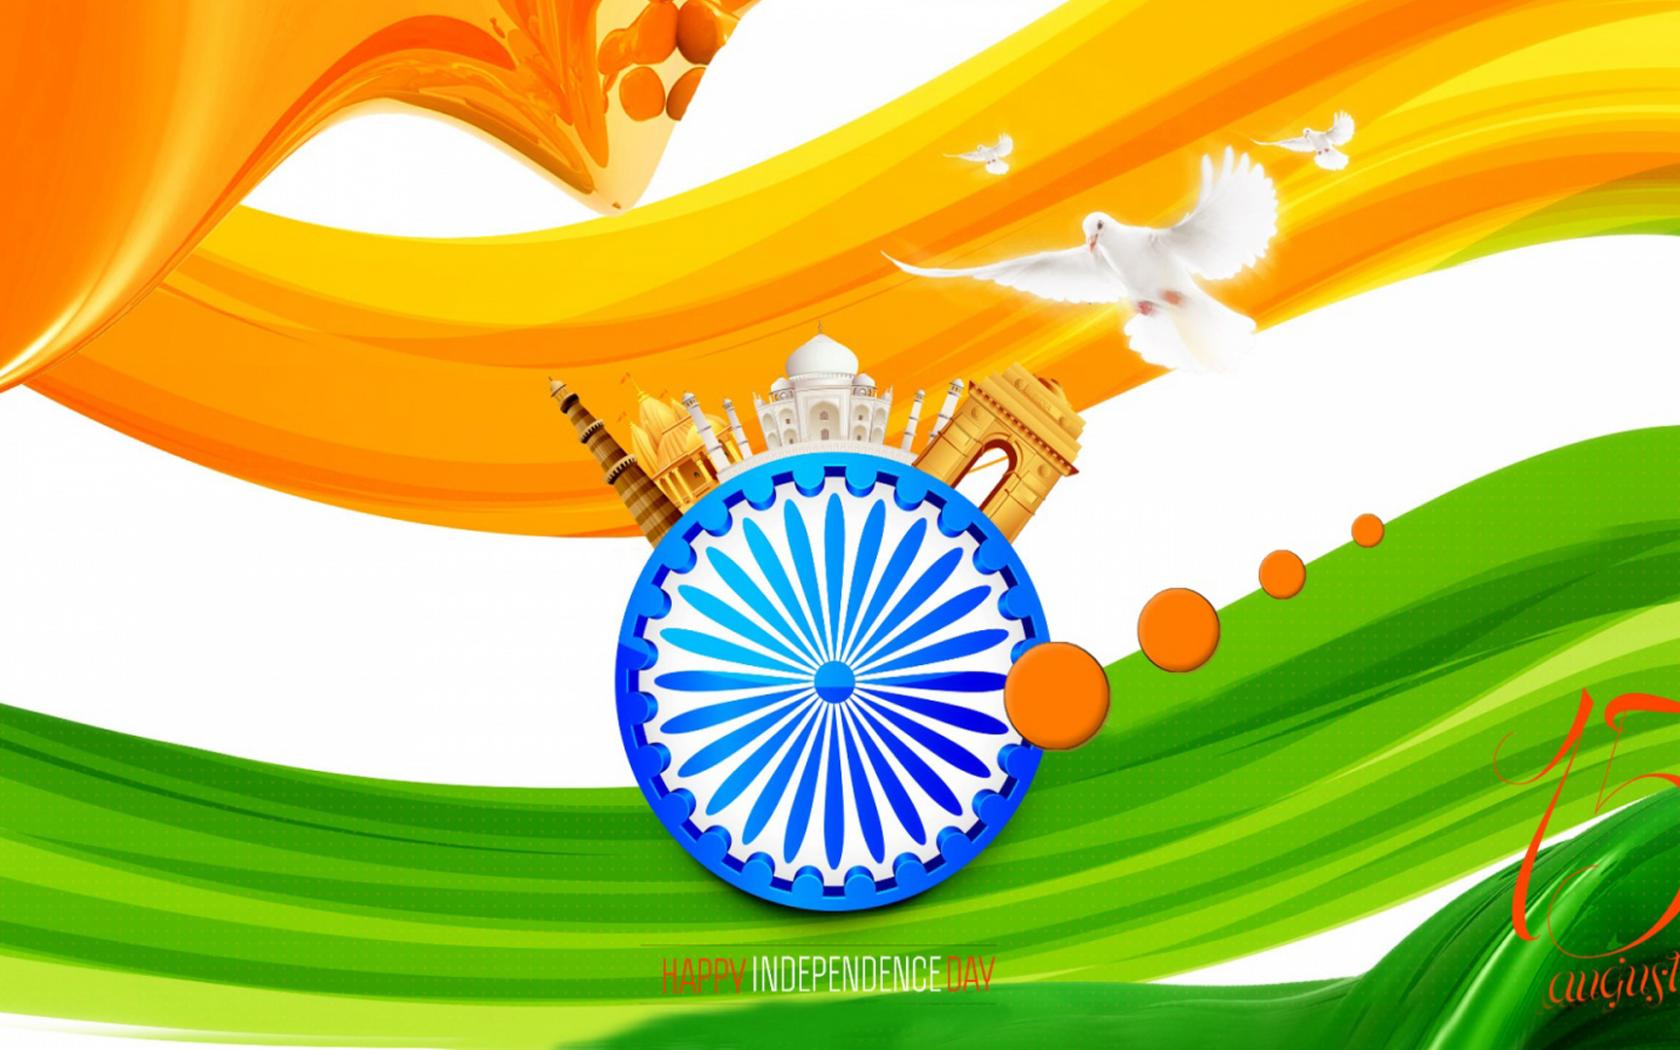 India Independence Day Wallpapers in HD with